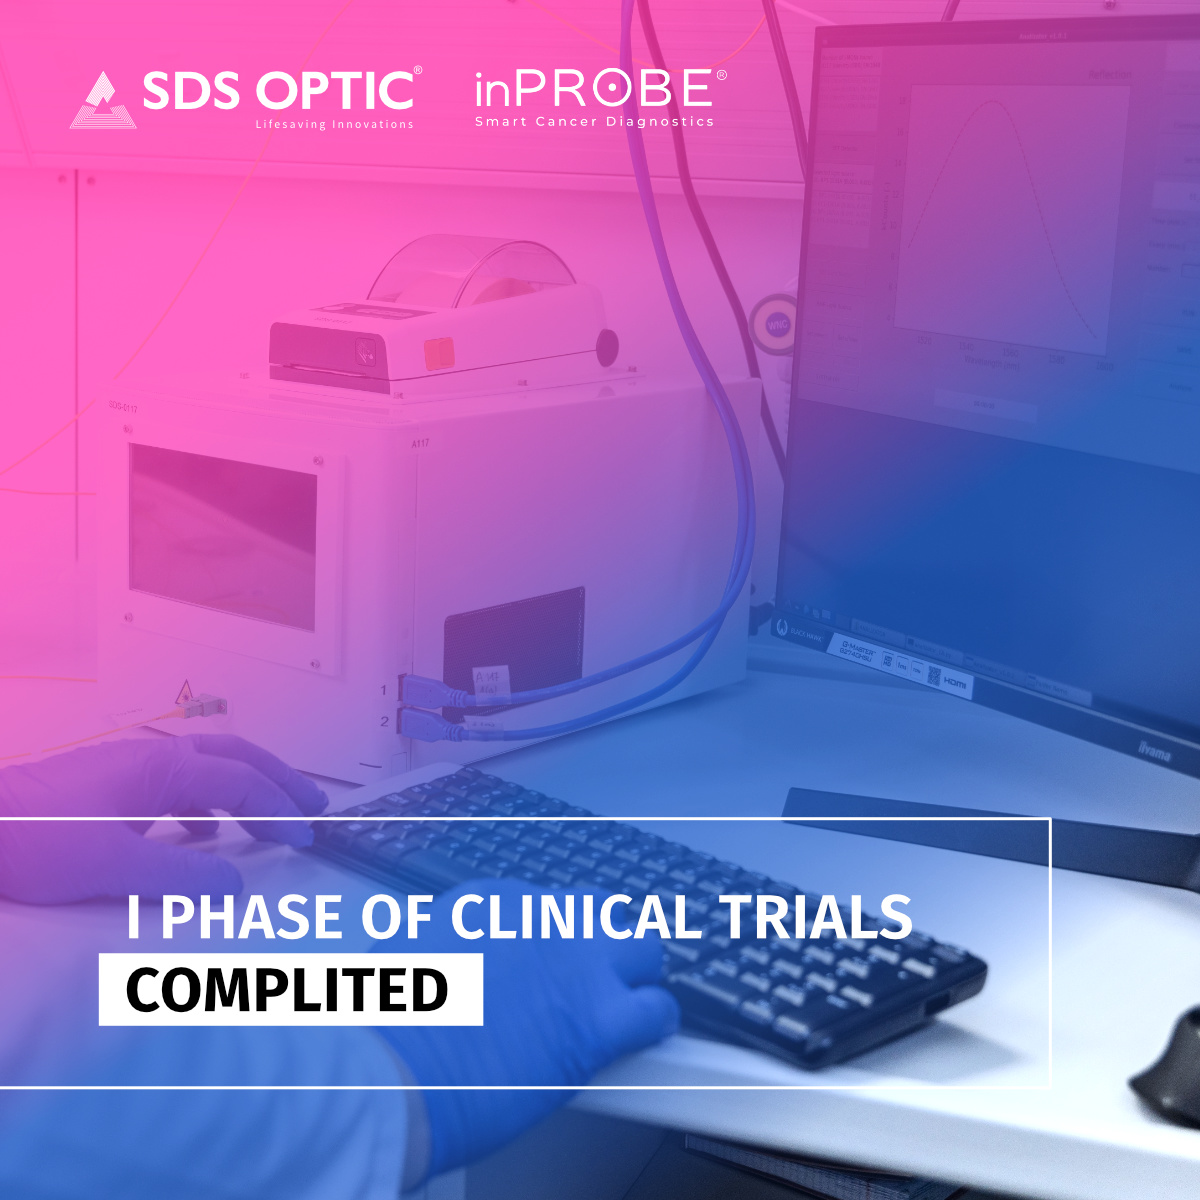 🔥 We received a report confirming the completion of the safety phase of #ClinicalTrials of the #inPROBE, a #MedicalDevice designed to breast cancer real-time #diagnostics. 🔗inPROBE: inprobe.com 🔗SDS Optic: sdsoptic.pl/en/main-en/ #sdsoptic #innovation #medtech